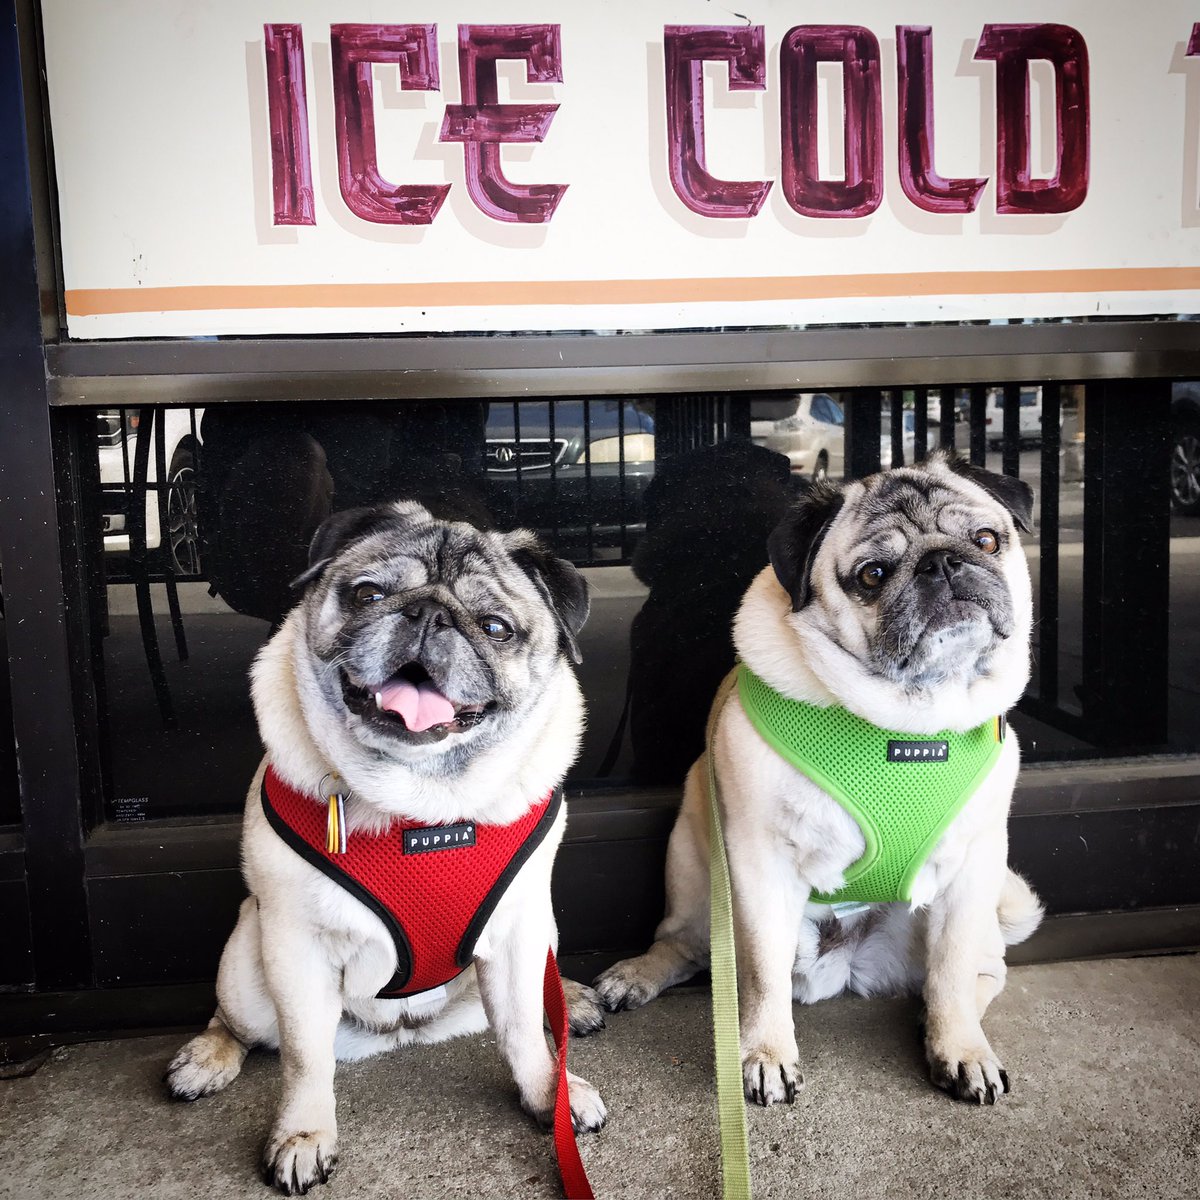 It's the warmest day in a lonnnnng time! @ArmadilloWillys #puglife #halfpriceburgers